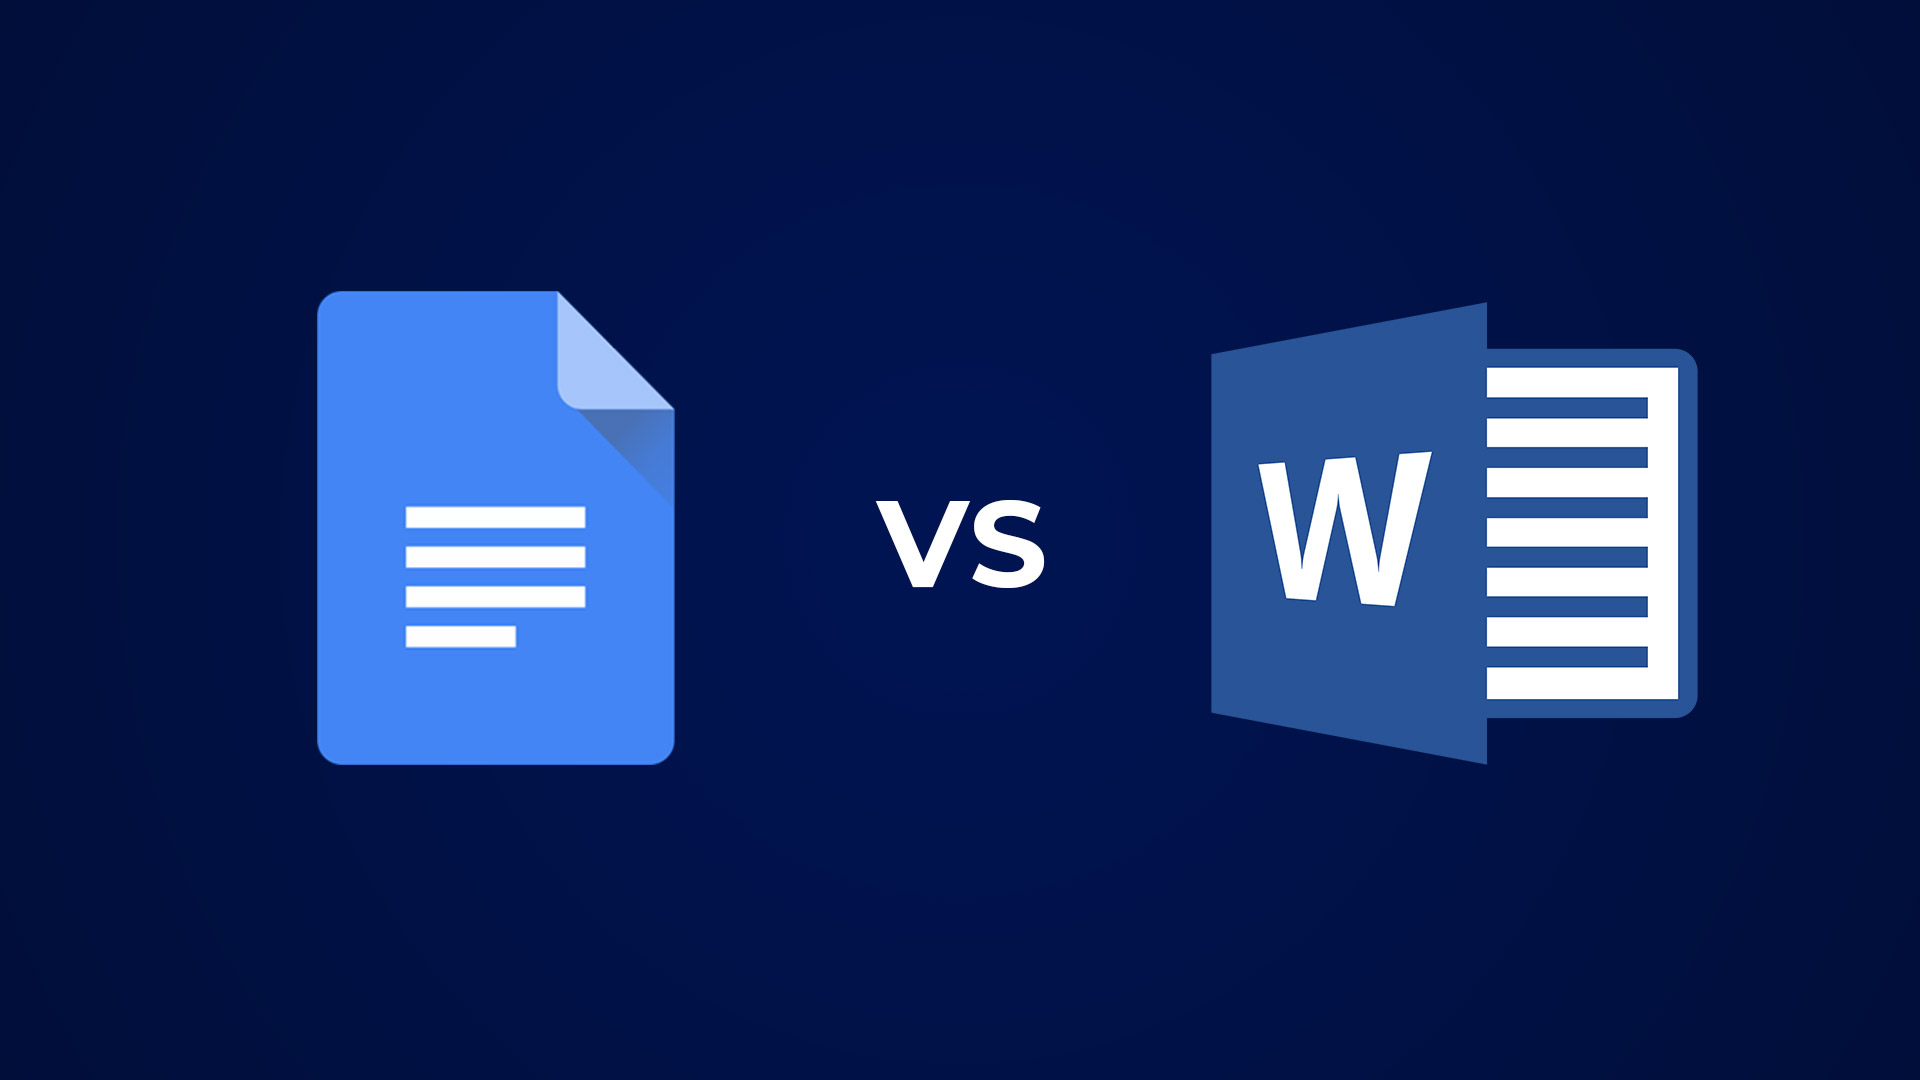 Big Update: Microsoft Word to Make Pasting Text Way Easier - No More Formatting Mess!